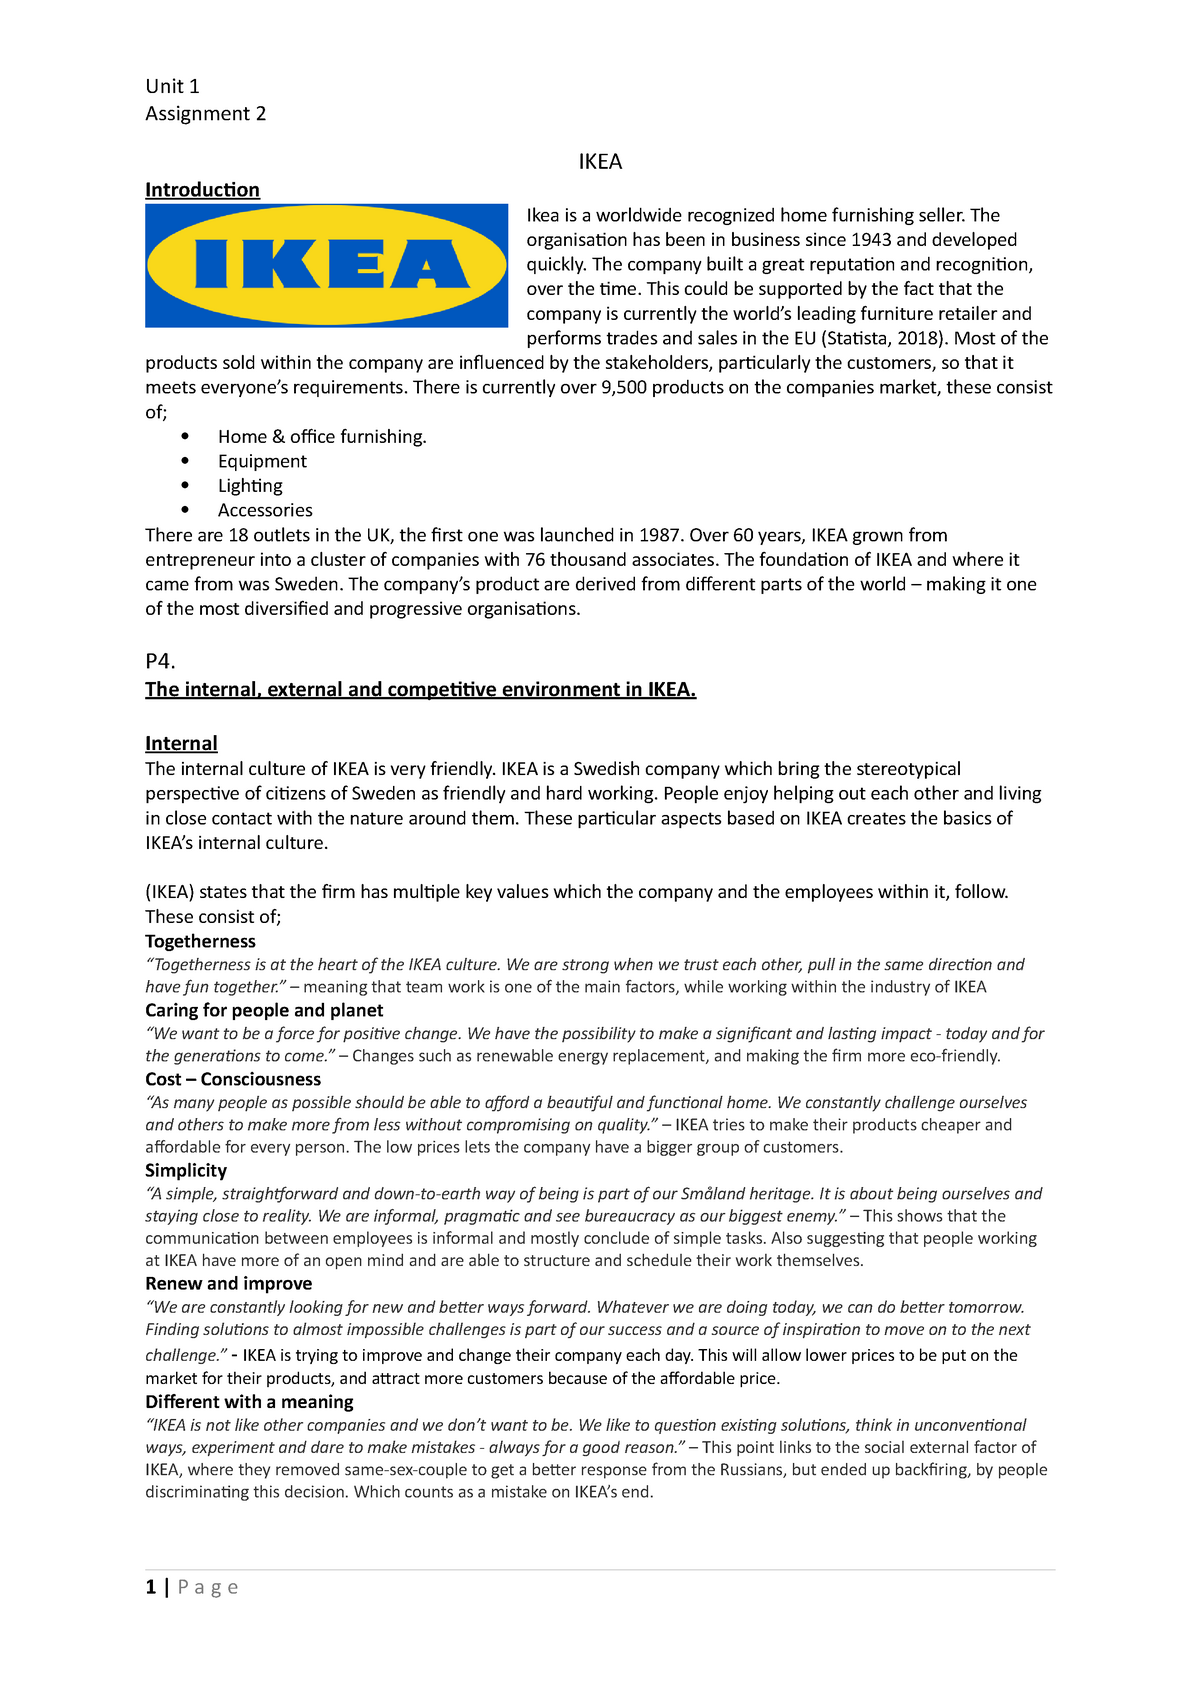 ikea company background assignment